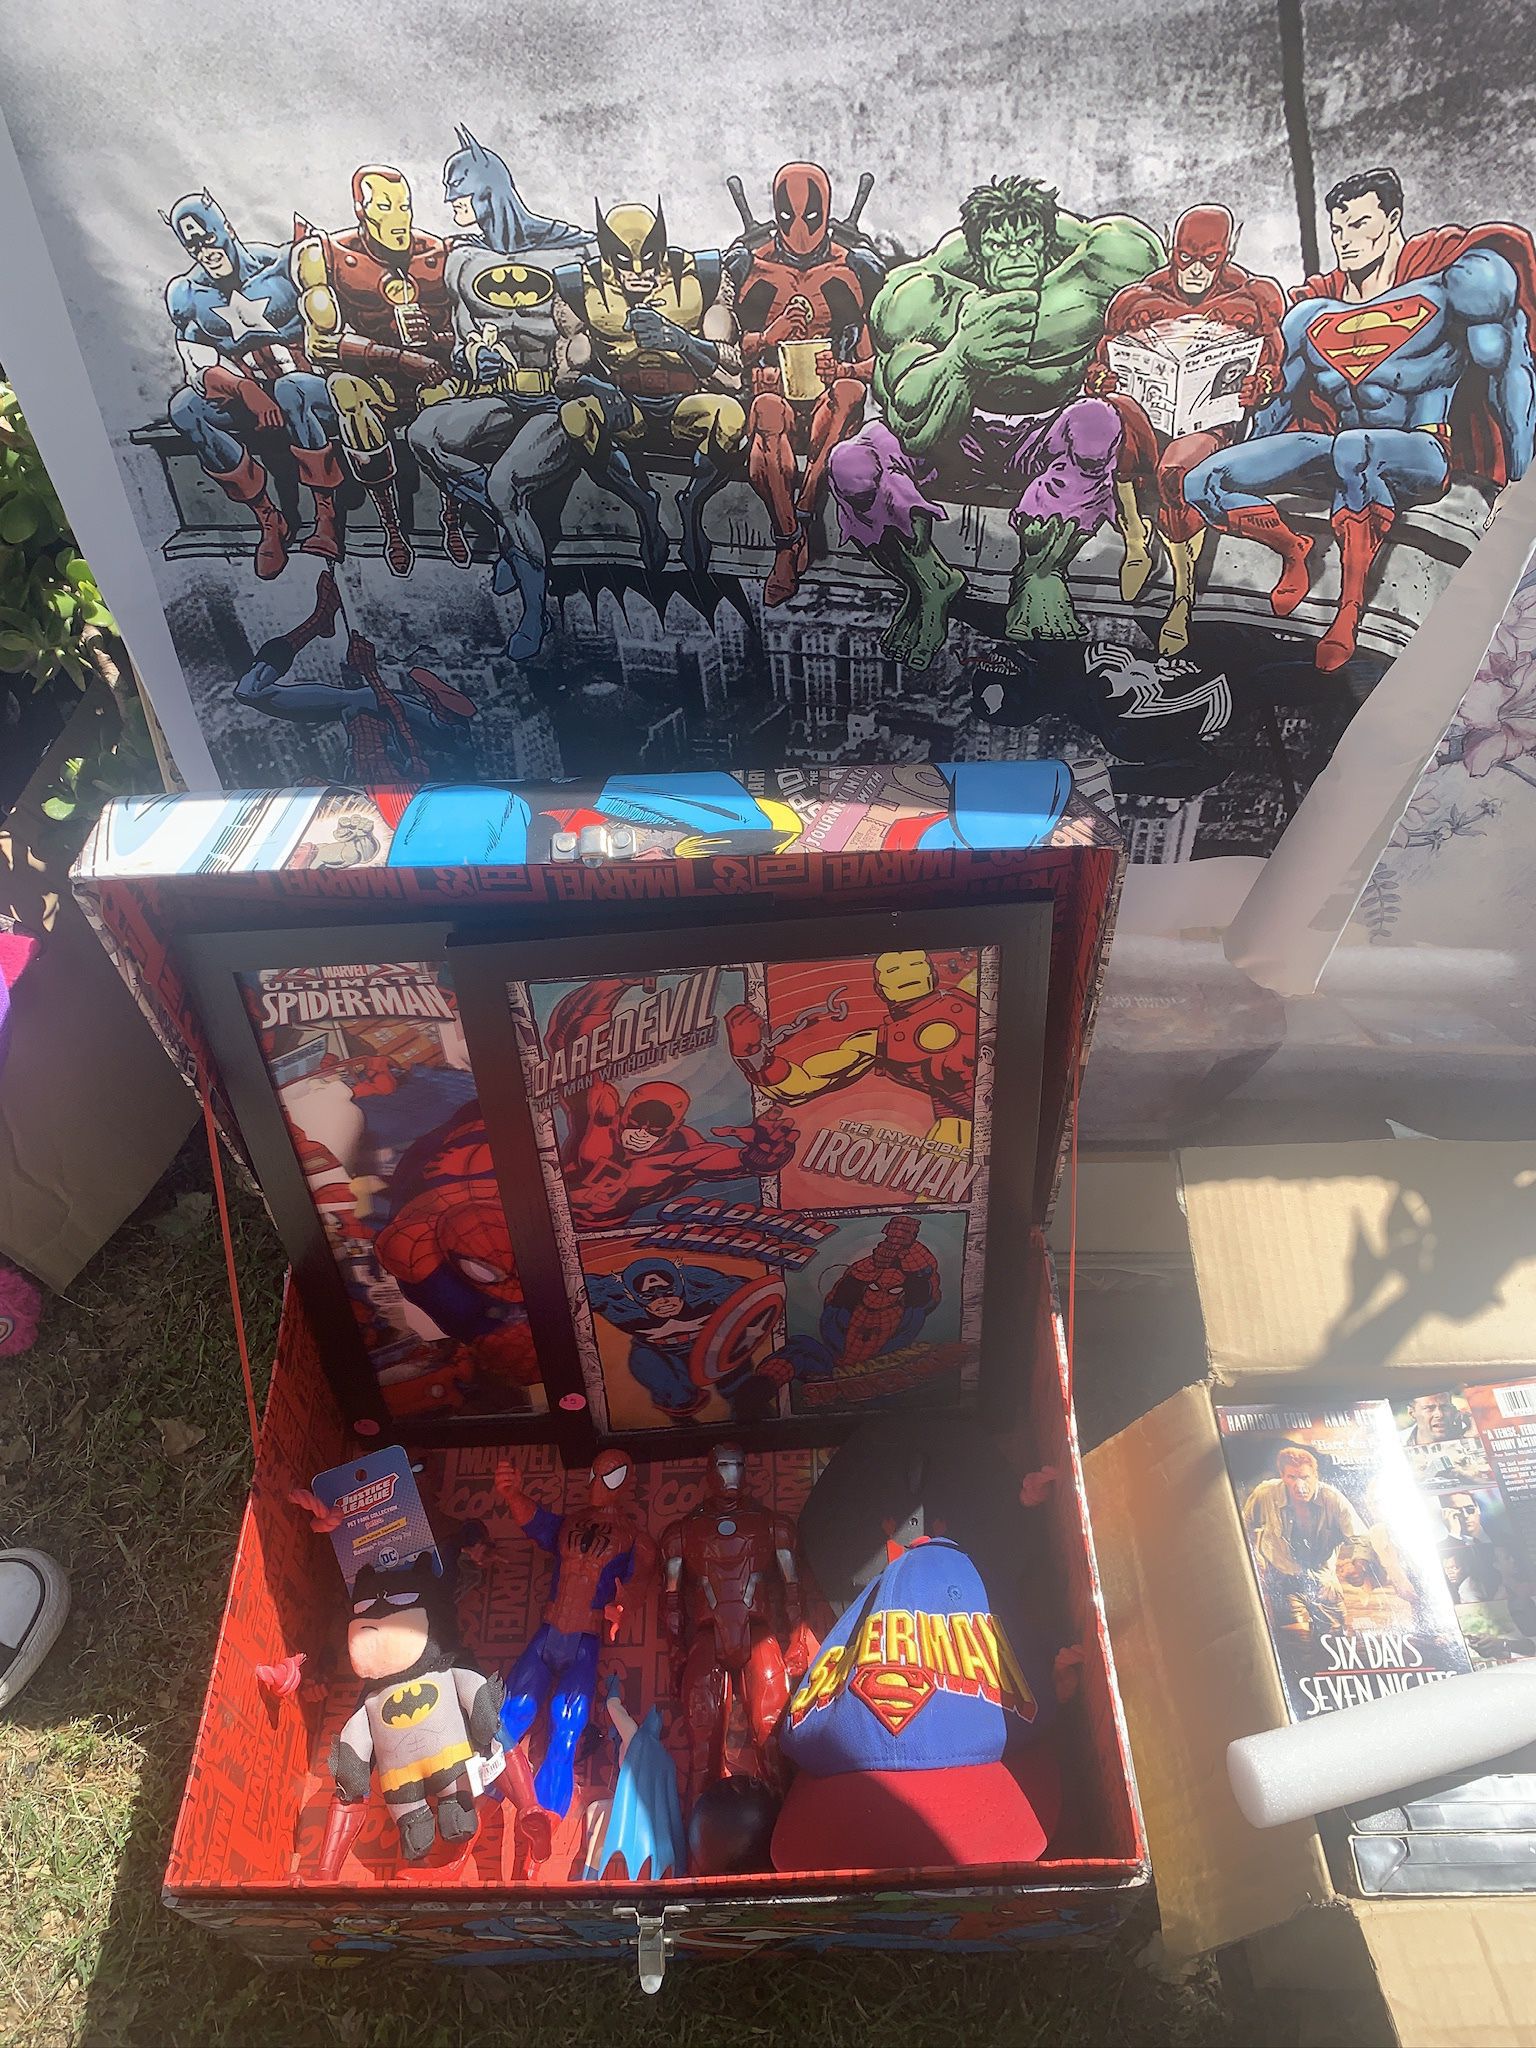 Marvel Toy Box, Picture Frames, Games, Spider-Man Hat, Action, Figures